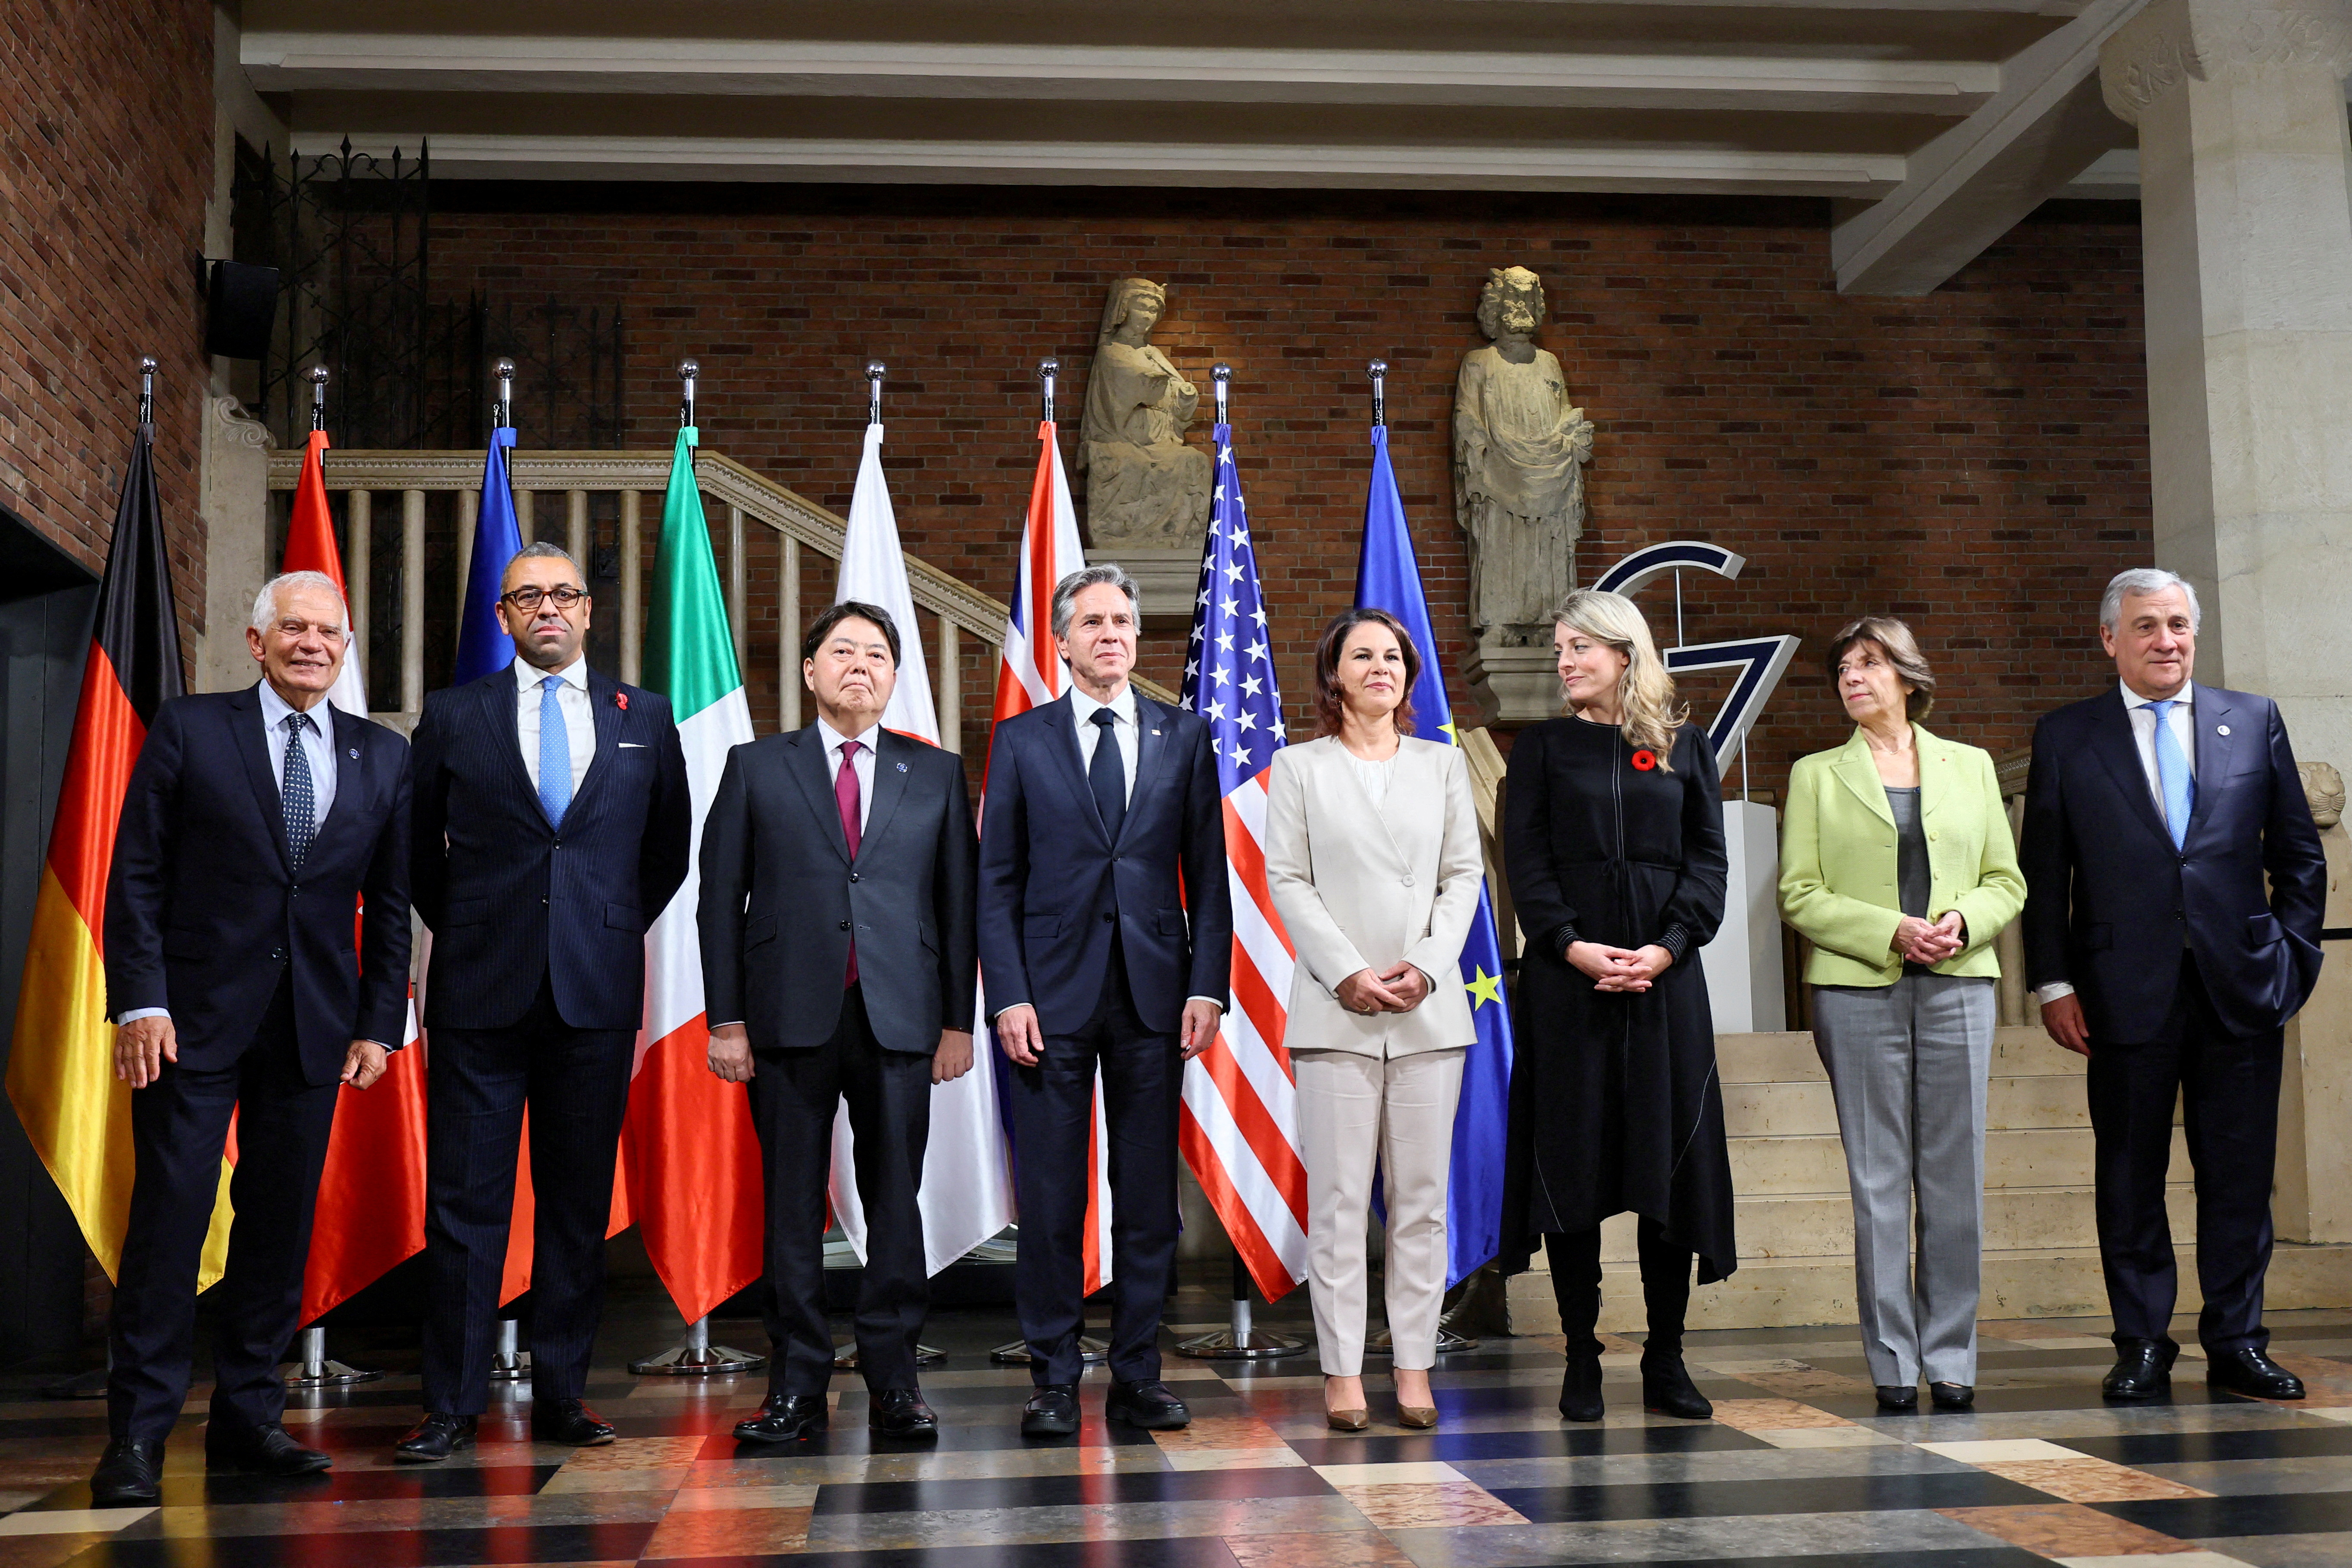 G-7 foreign ministers meeting in Germany